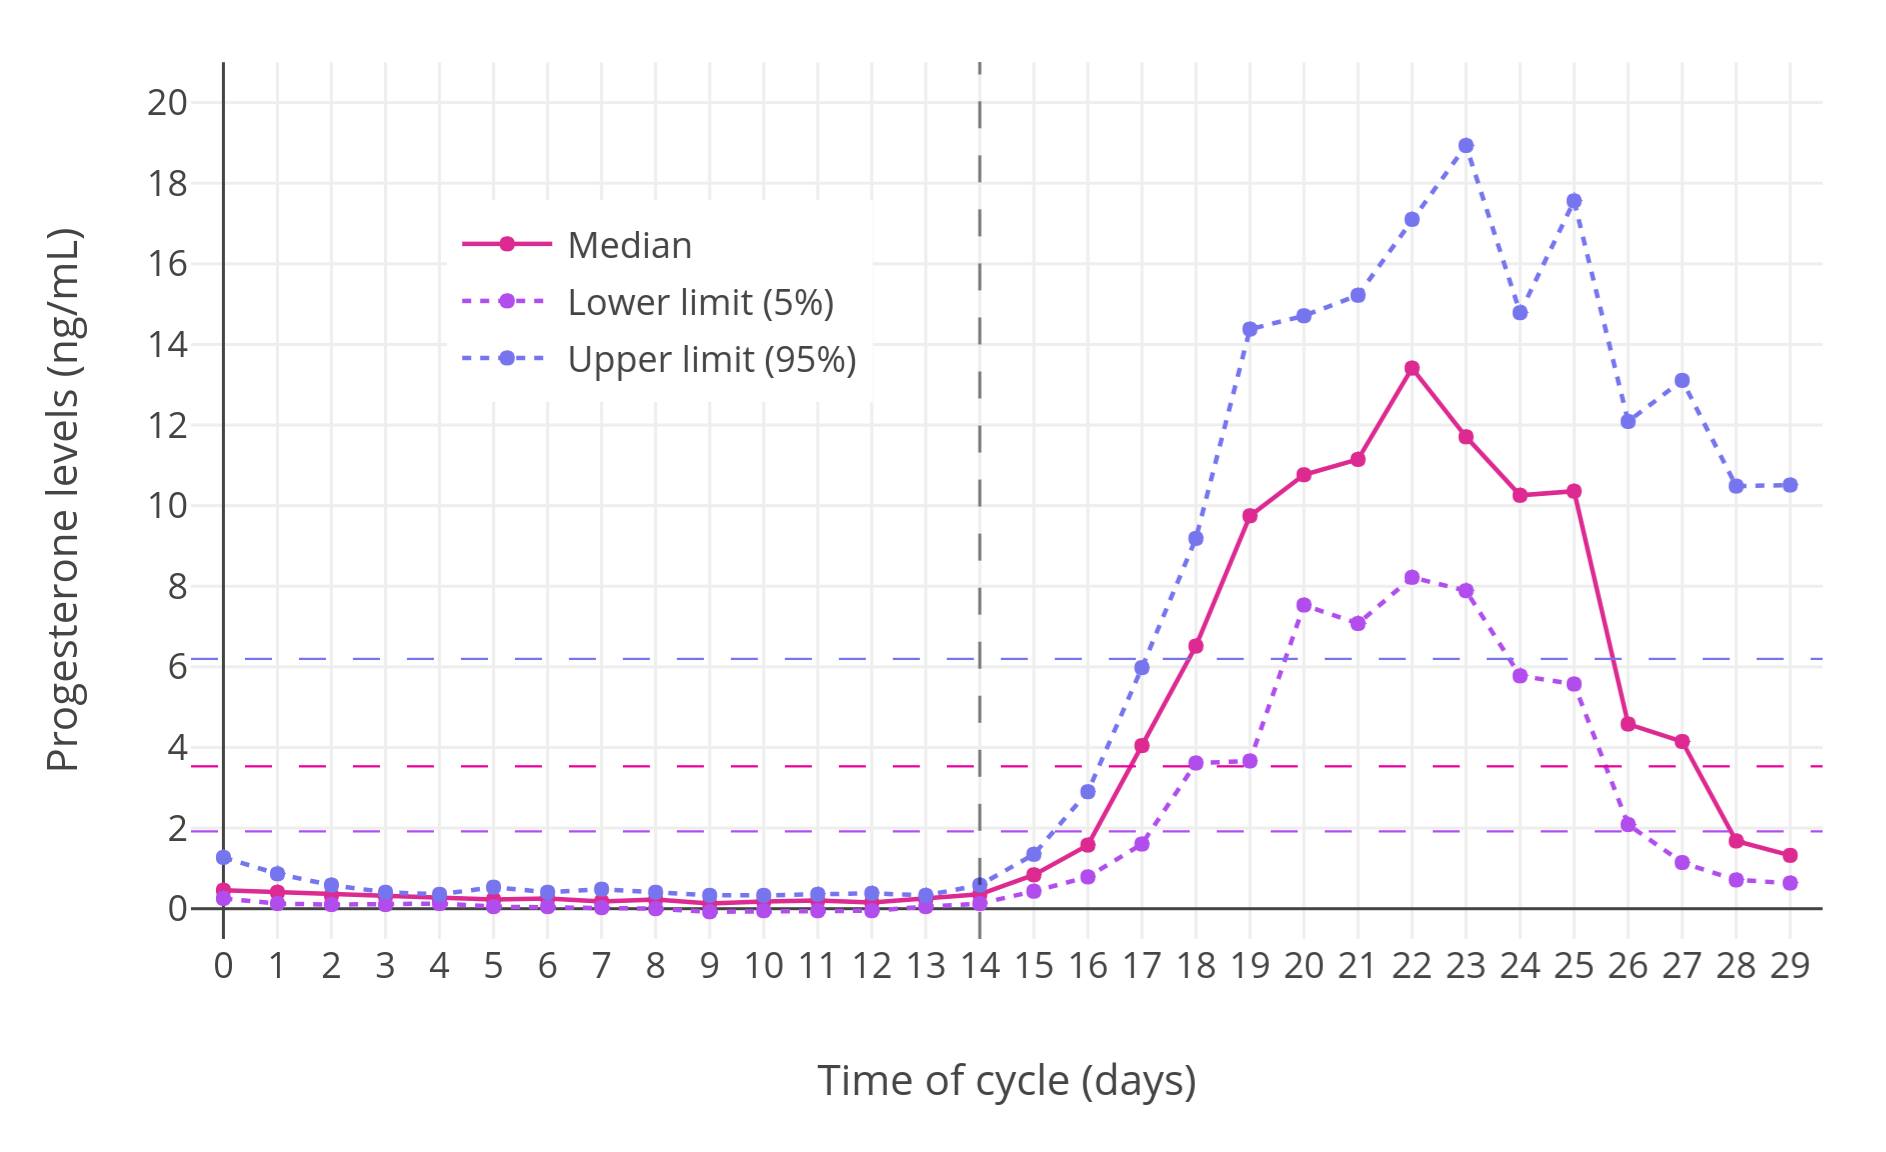 progesterone level through time of cycle in women.jpg